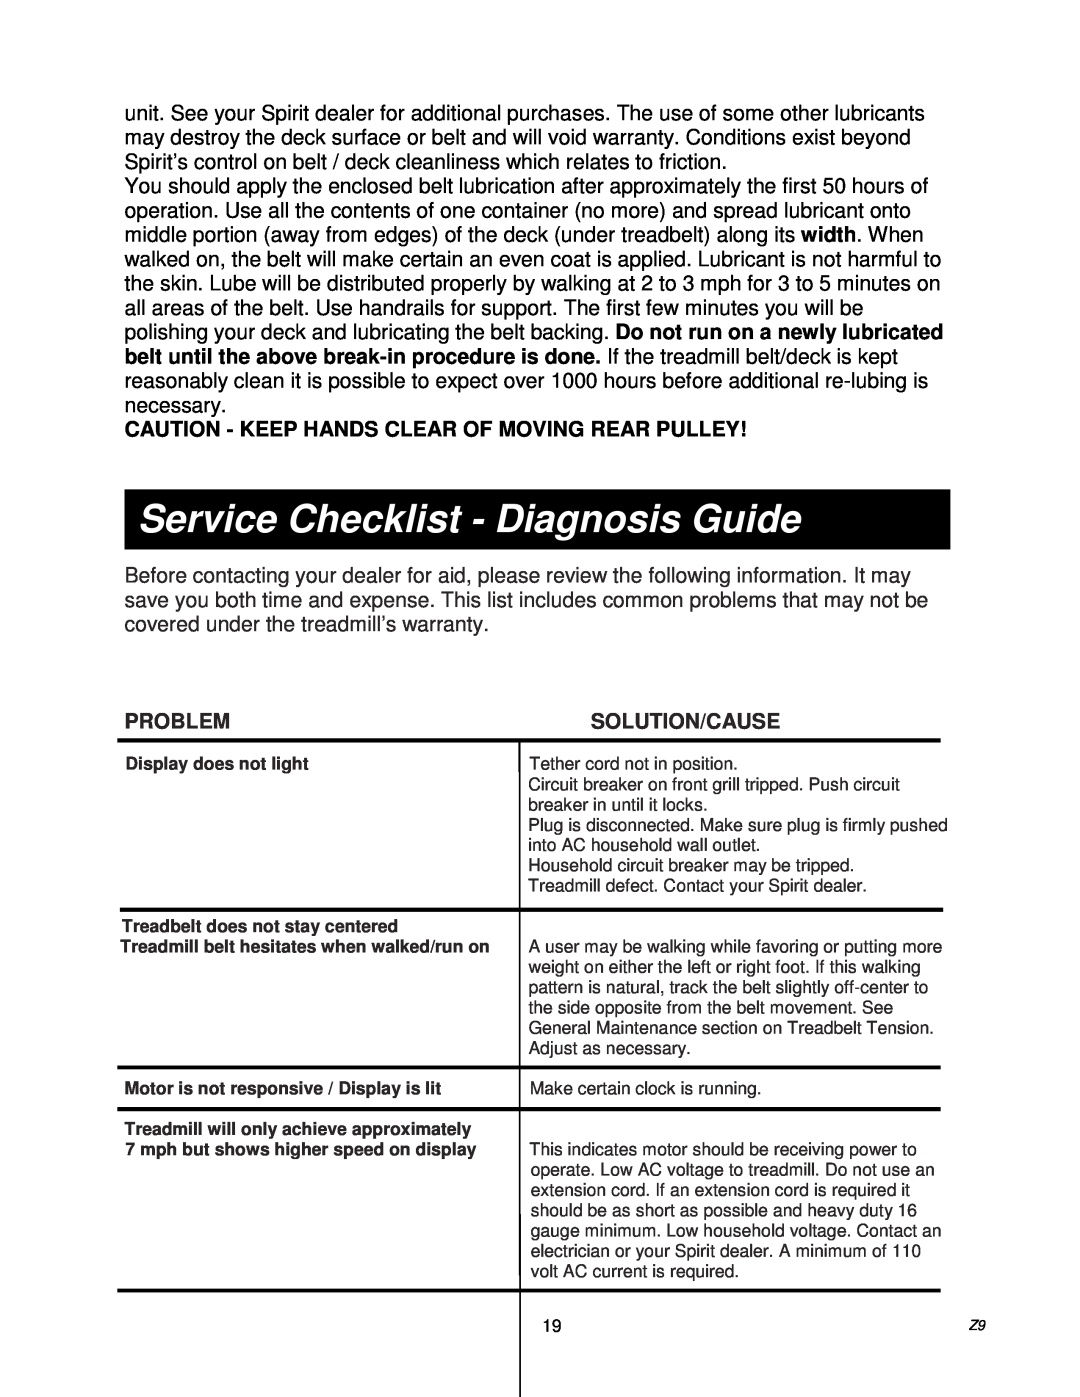 Spirit Z9 Service Checklist - Diagnosis Guide, Caution - Keep Hands Clear Of Moving Rear Pulley, Problem, Solution/Cause 